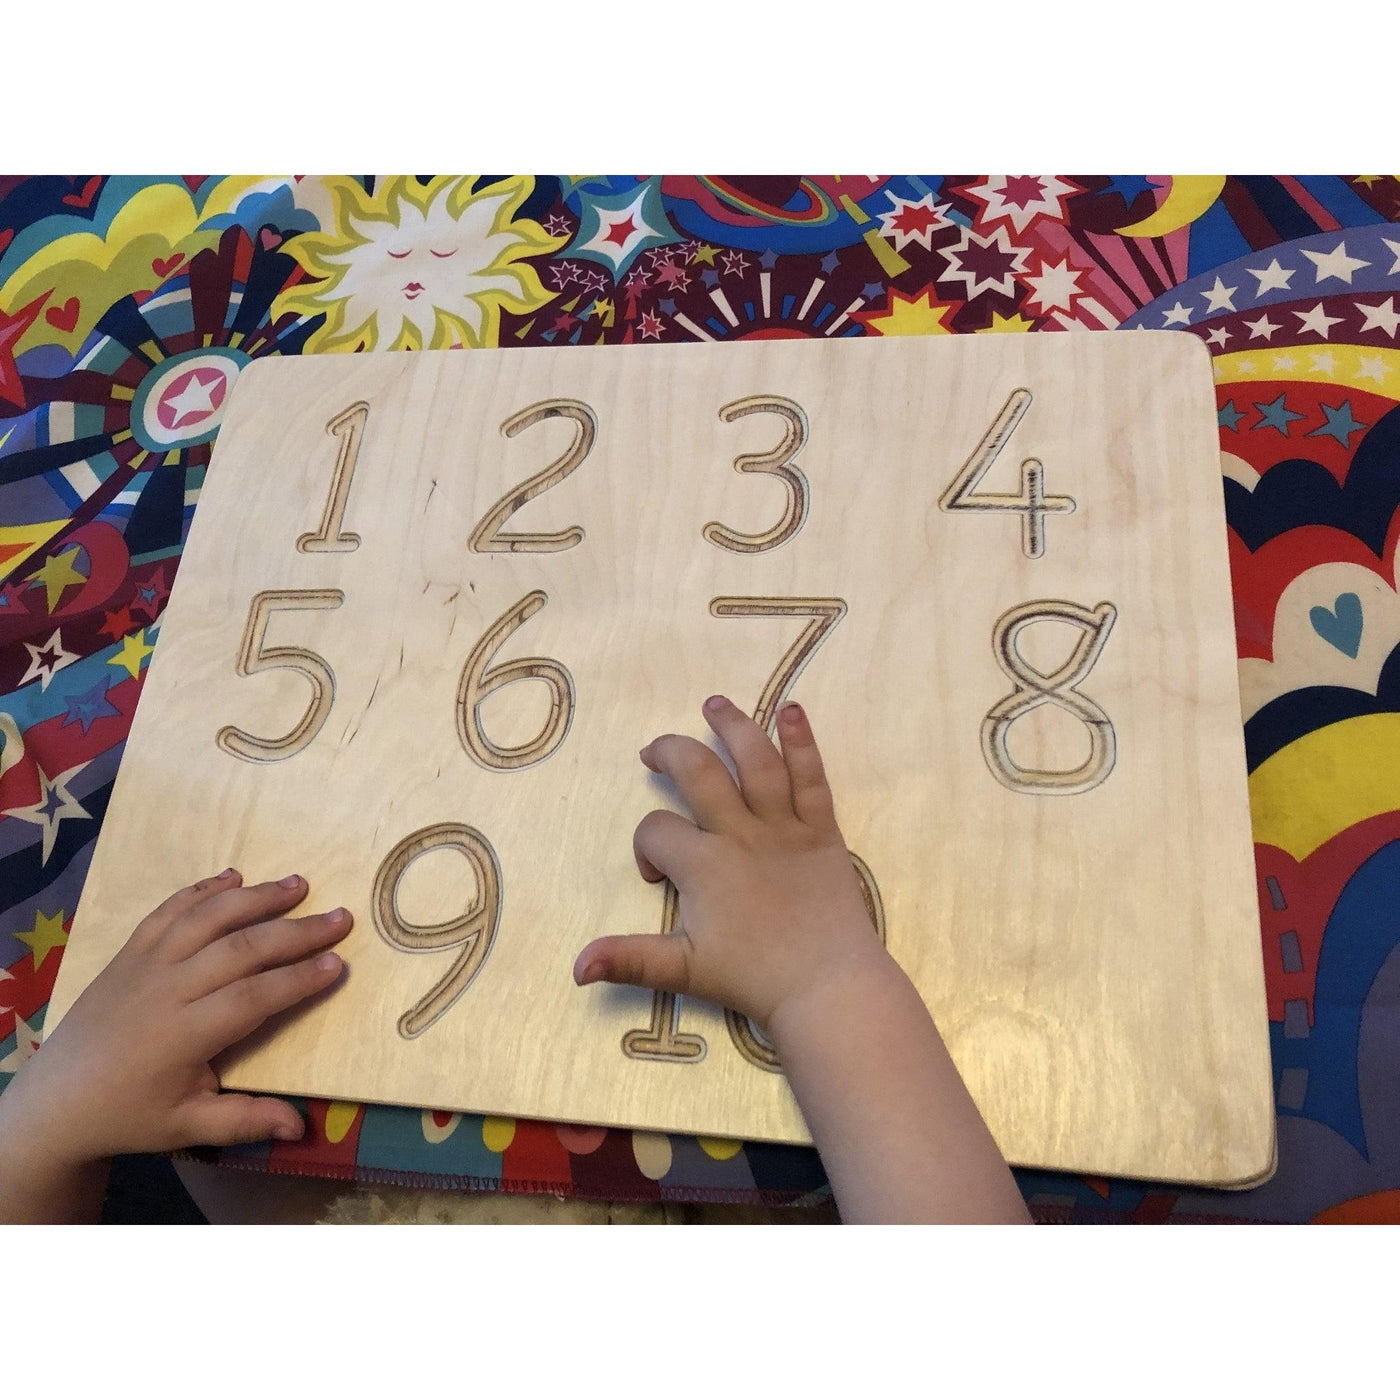 Sawdust & Rainbows 1-10 Number Wooden Tracing Board